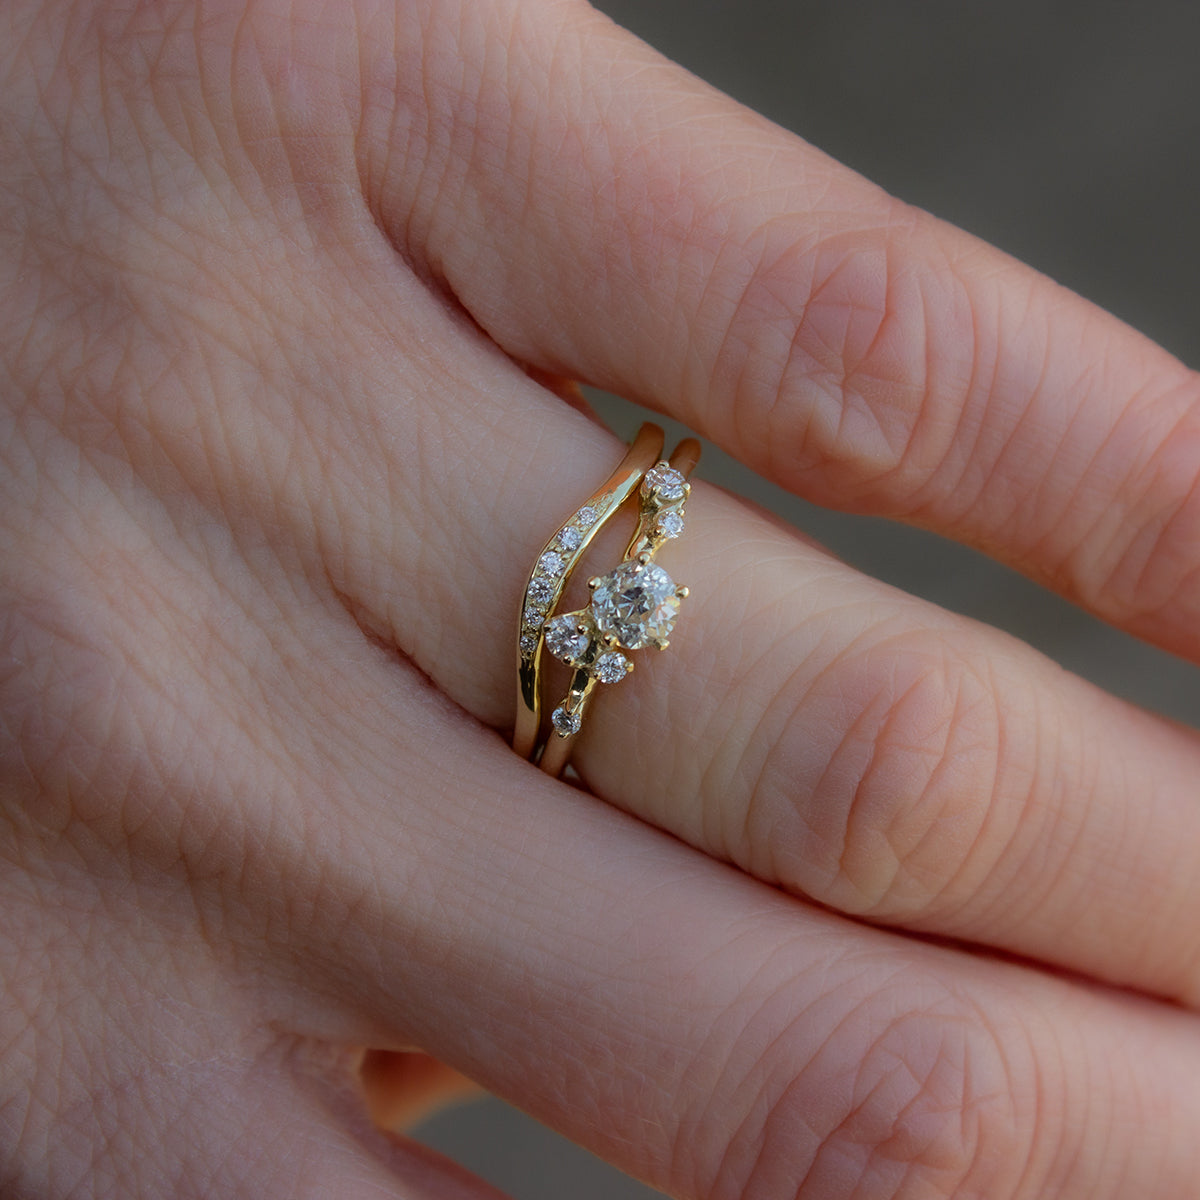 Alternative engagement ring featuring old cut white diamond surrounded by brilliant cut diamonds and inspired by florals. Ring is coupled with perfectly matching, curved gold wedding band, glimmering with diamonds.